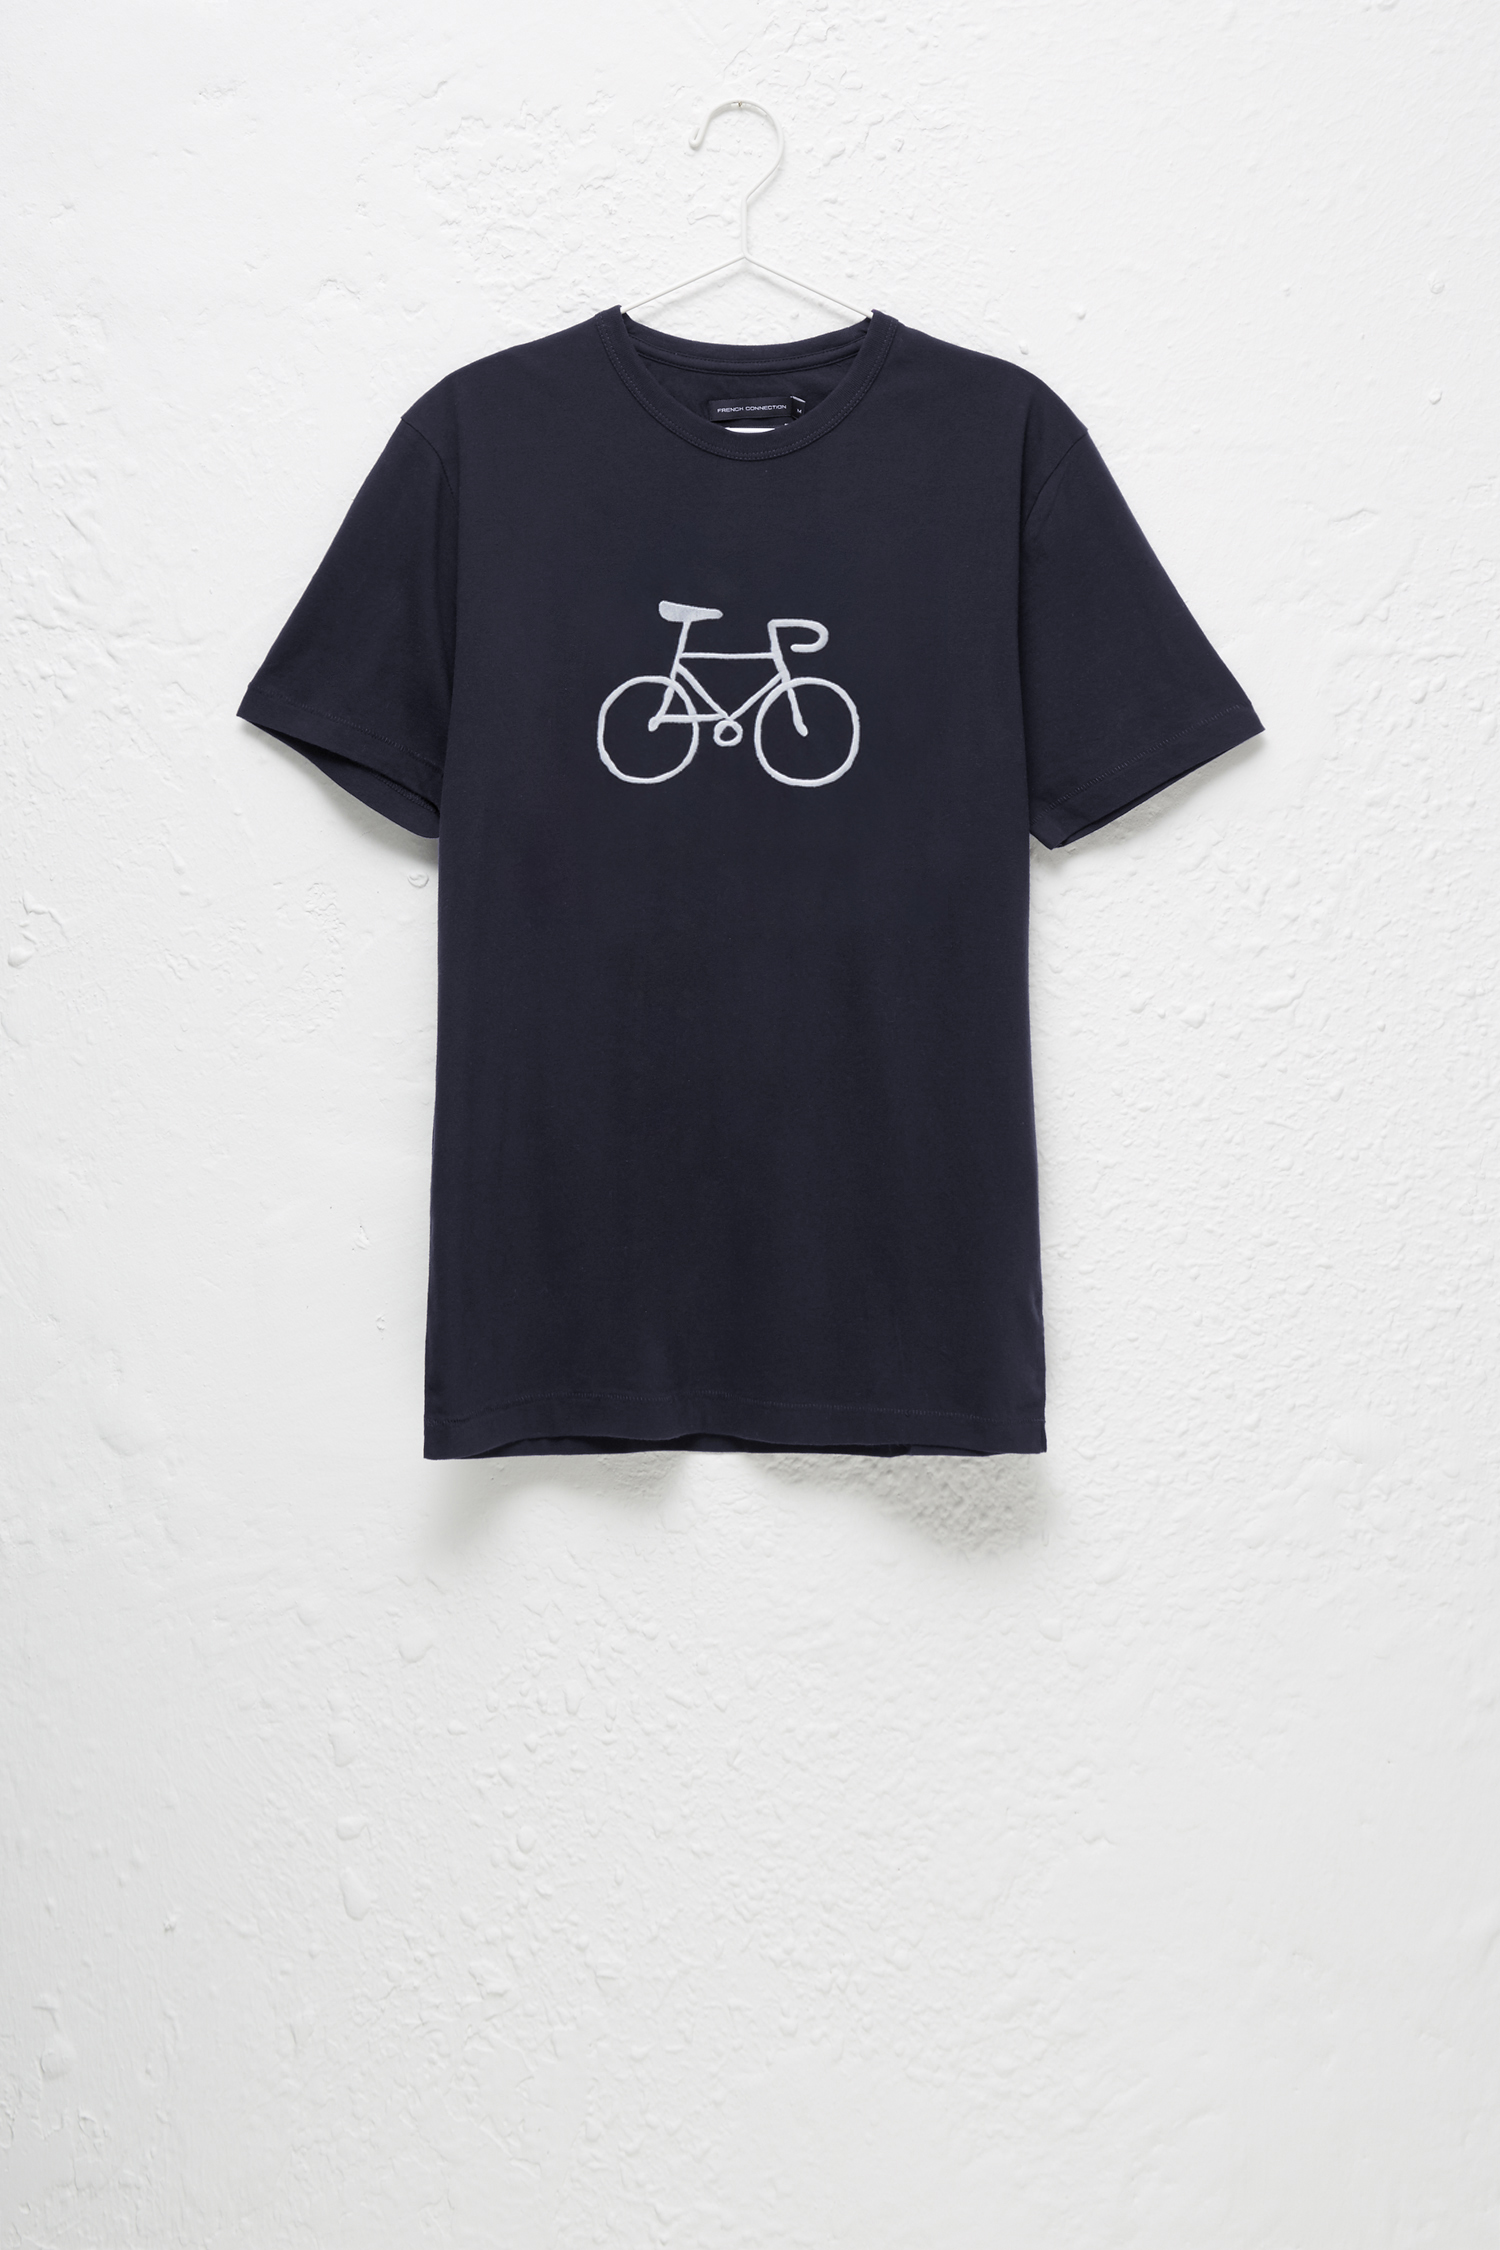 Embroidered t shirts ... bike embroidered t-shirt. loading images. FYVXEFB